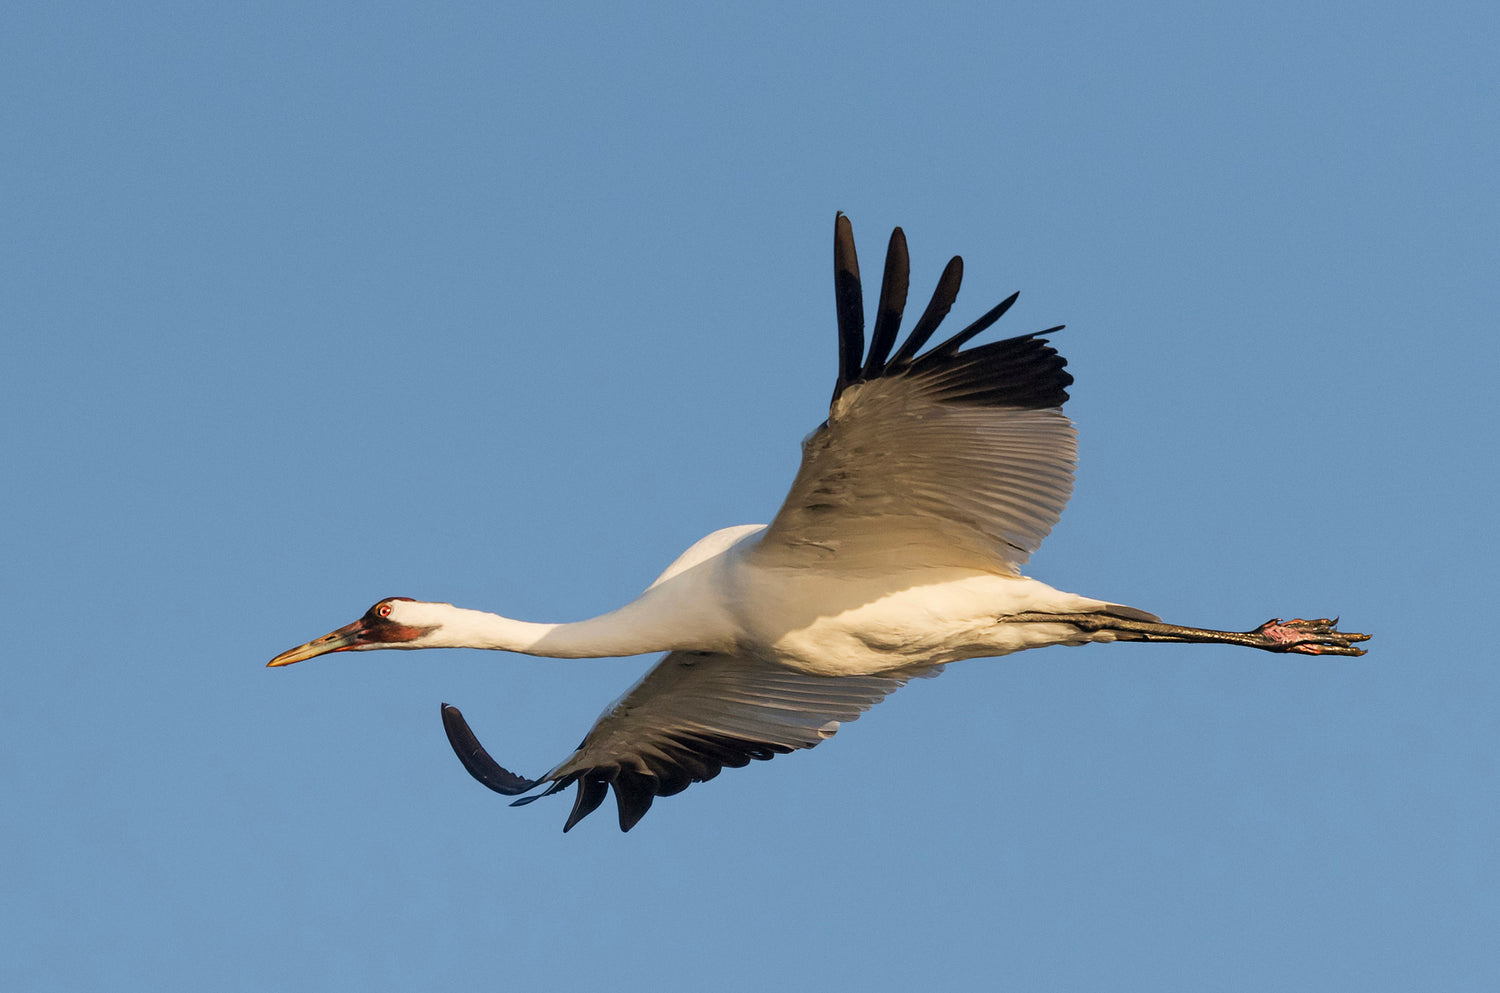 A whooping crane flying through the sky